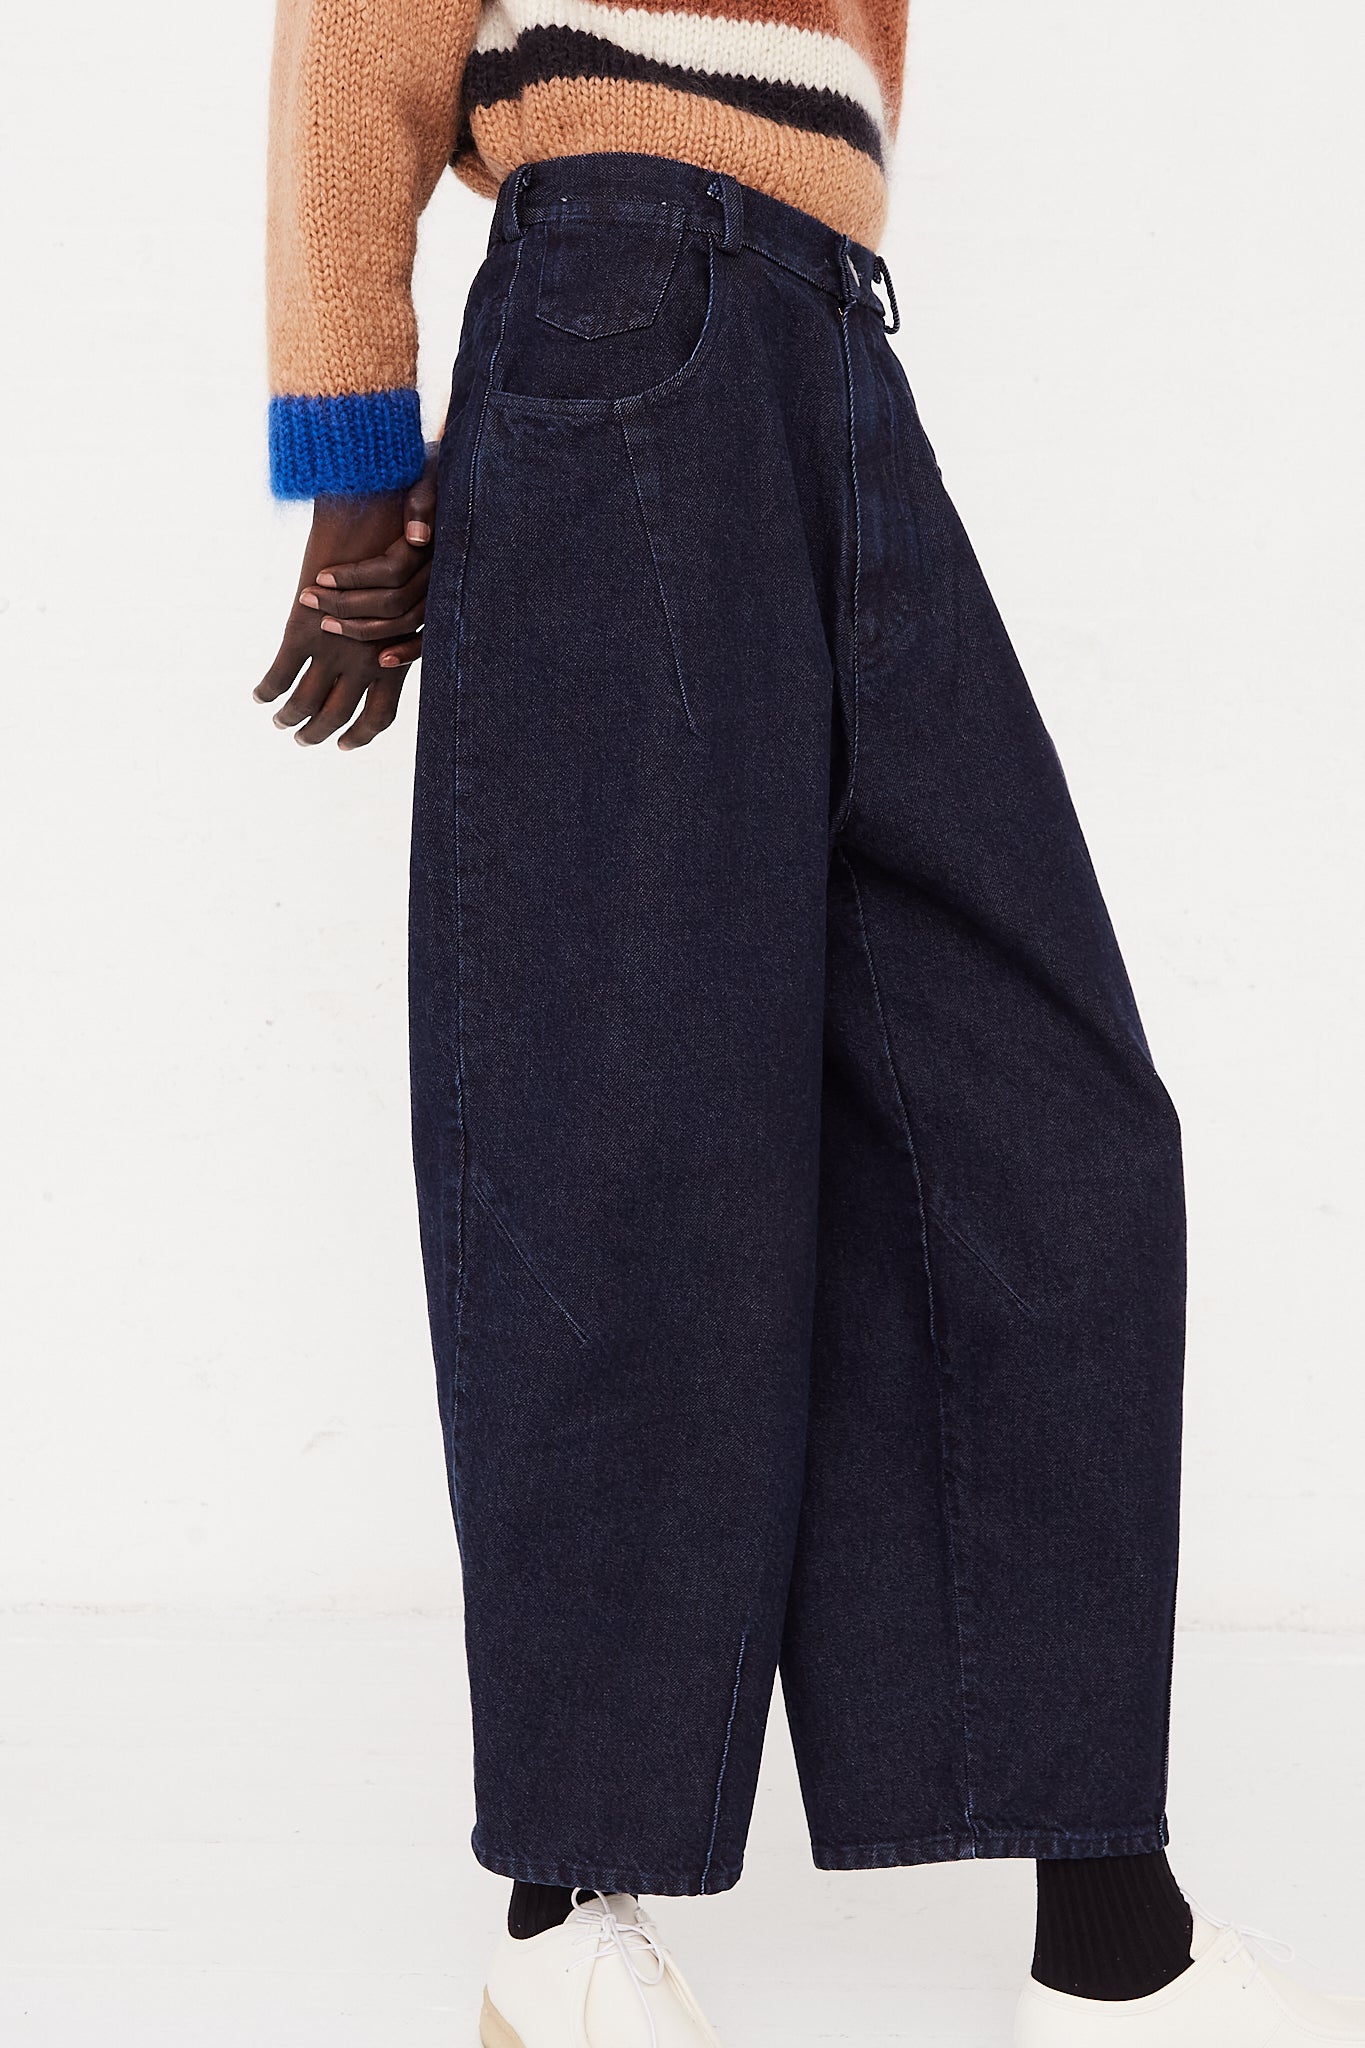 CORDERA Baggy Pant in Denim | Oroboro Store | Front image upclose on model